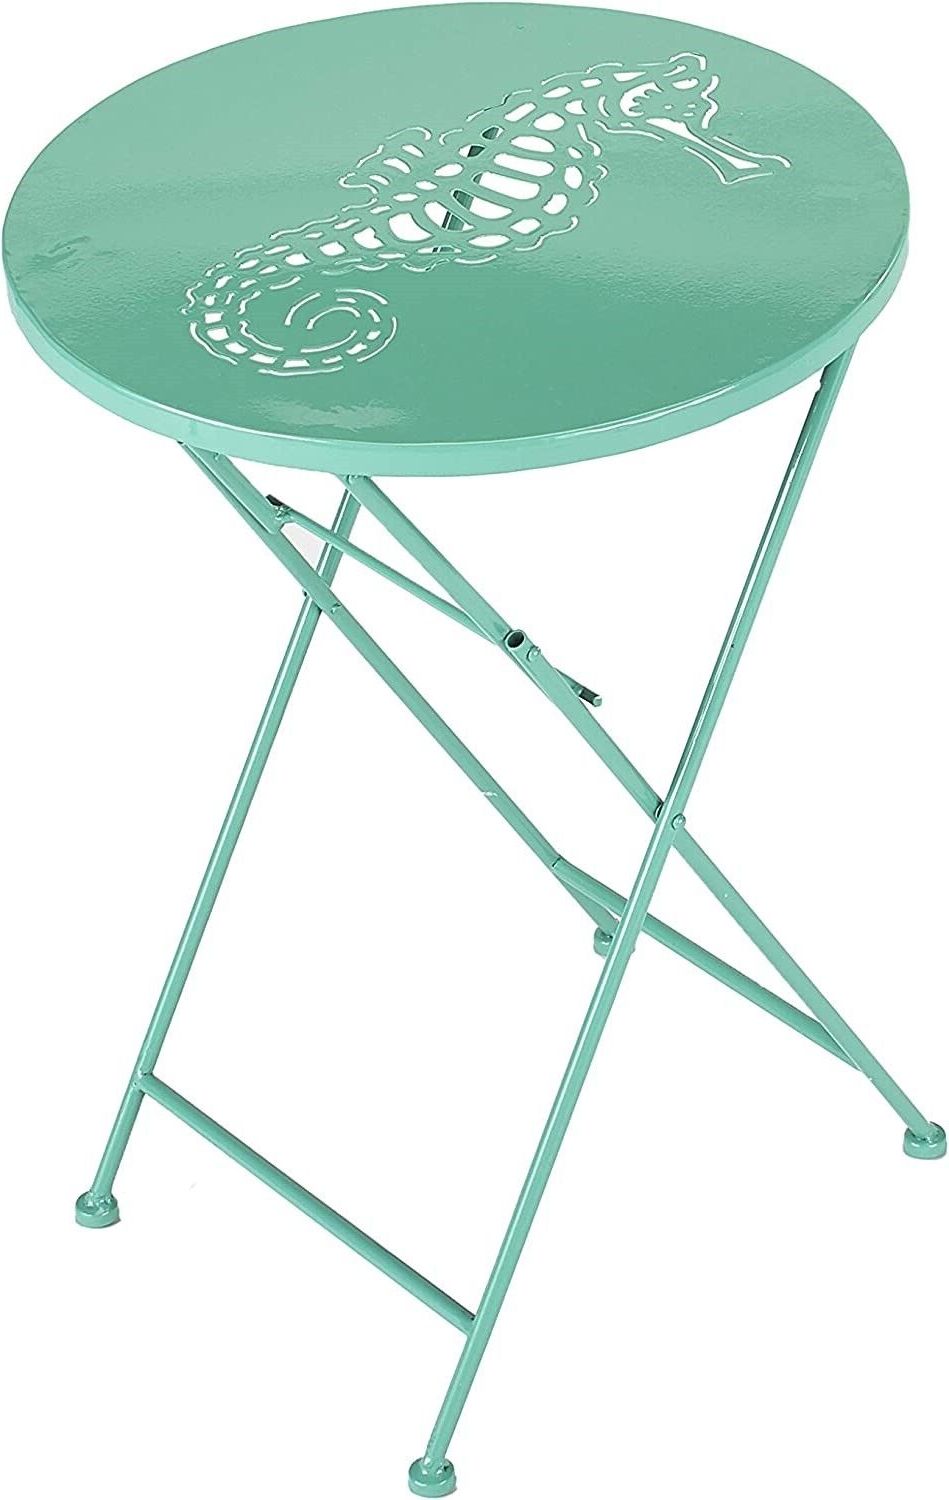 Folding Accent Outdoor Tables For Most Recent Folding Side Table Furniture End Accent Outdoor Patio Round Metal Small  Green (View 12 of 15)